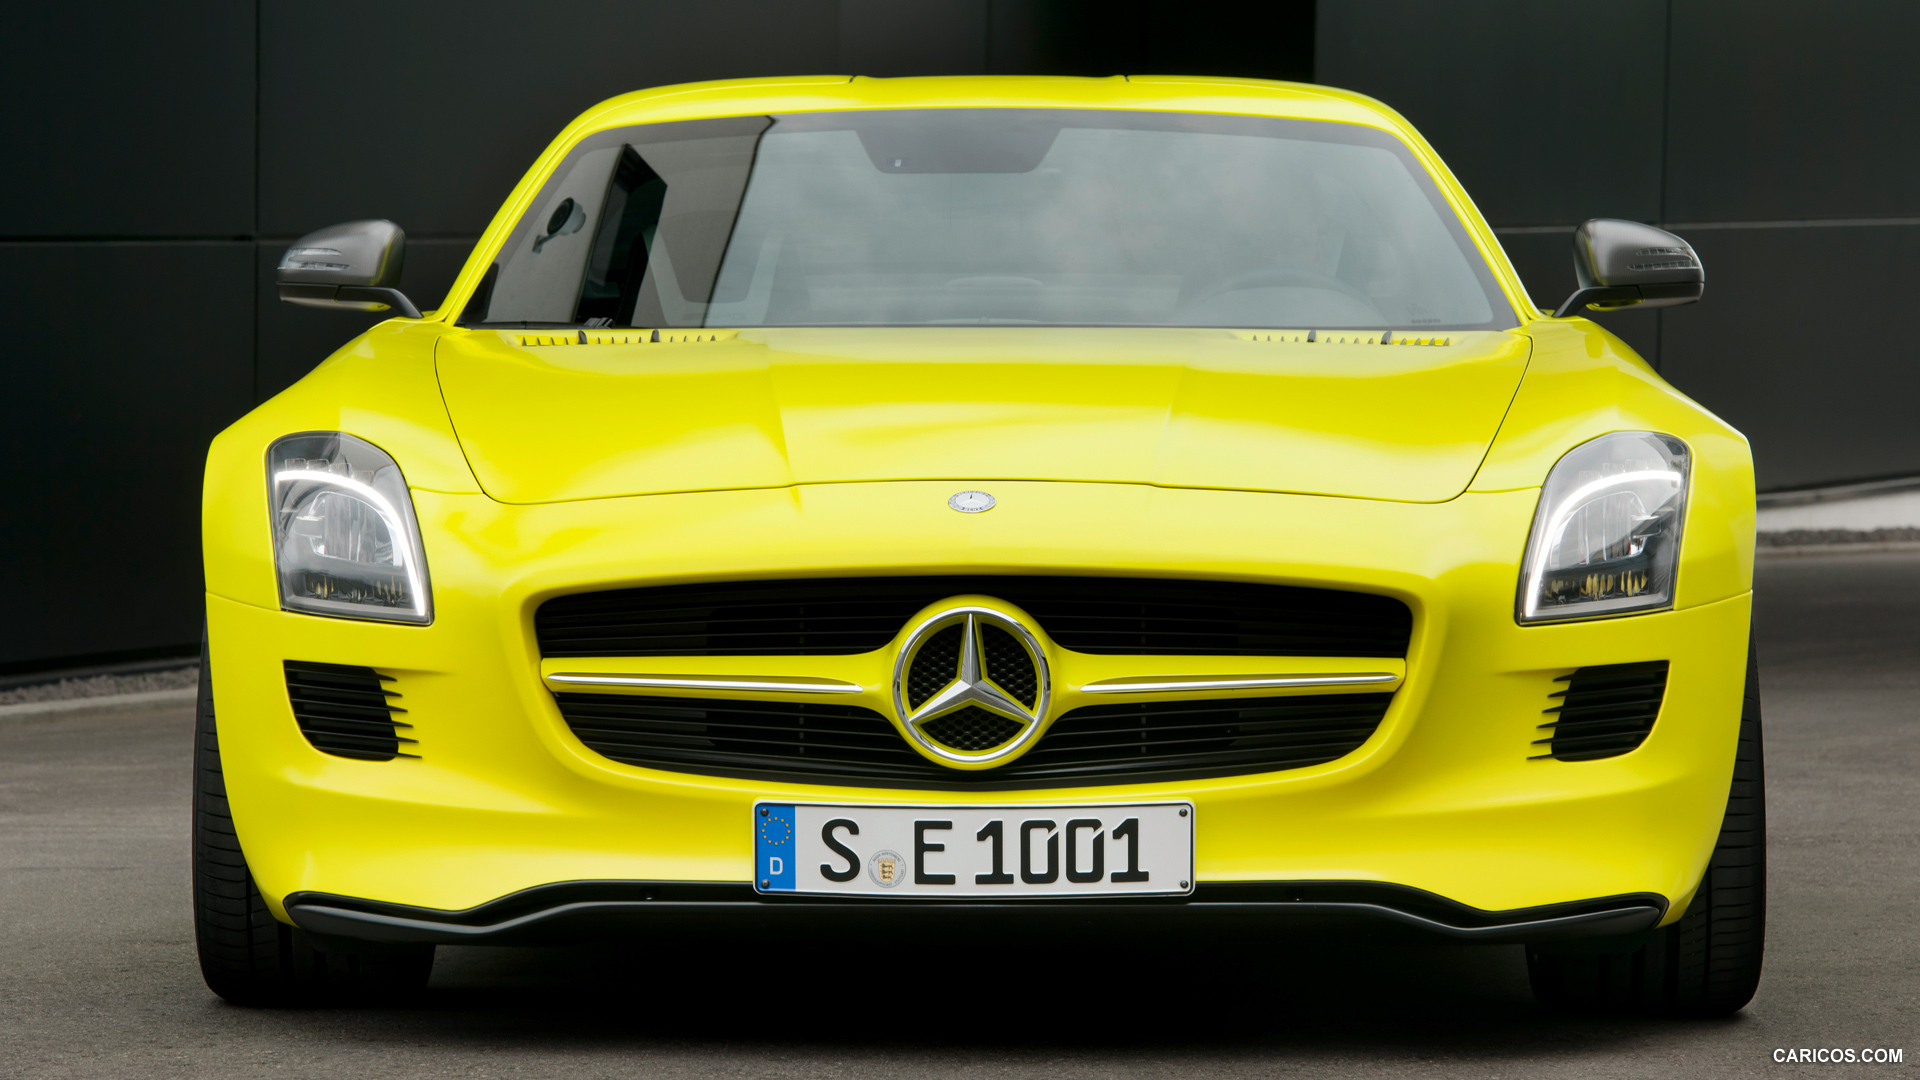 Mercedes-Benz SLS AMG E-CELL Concept  - Front, #49 of 60